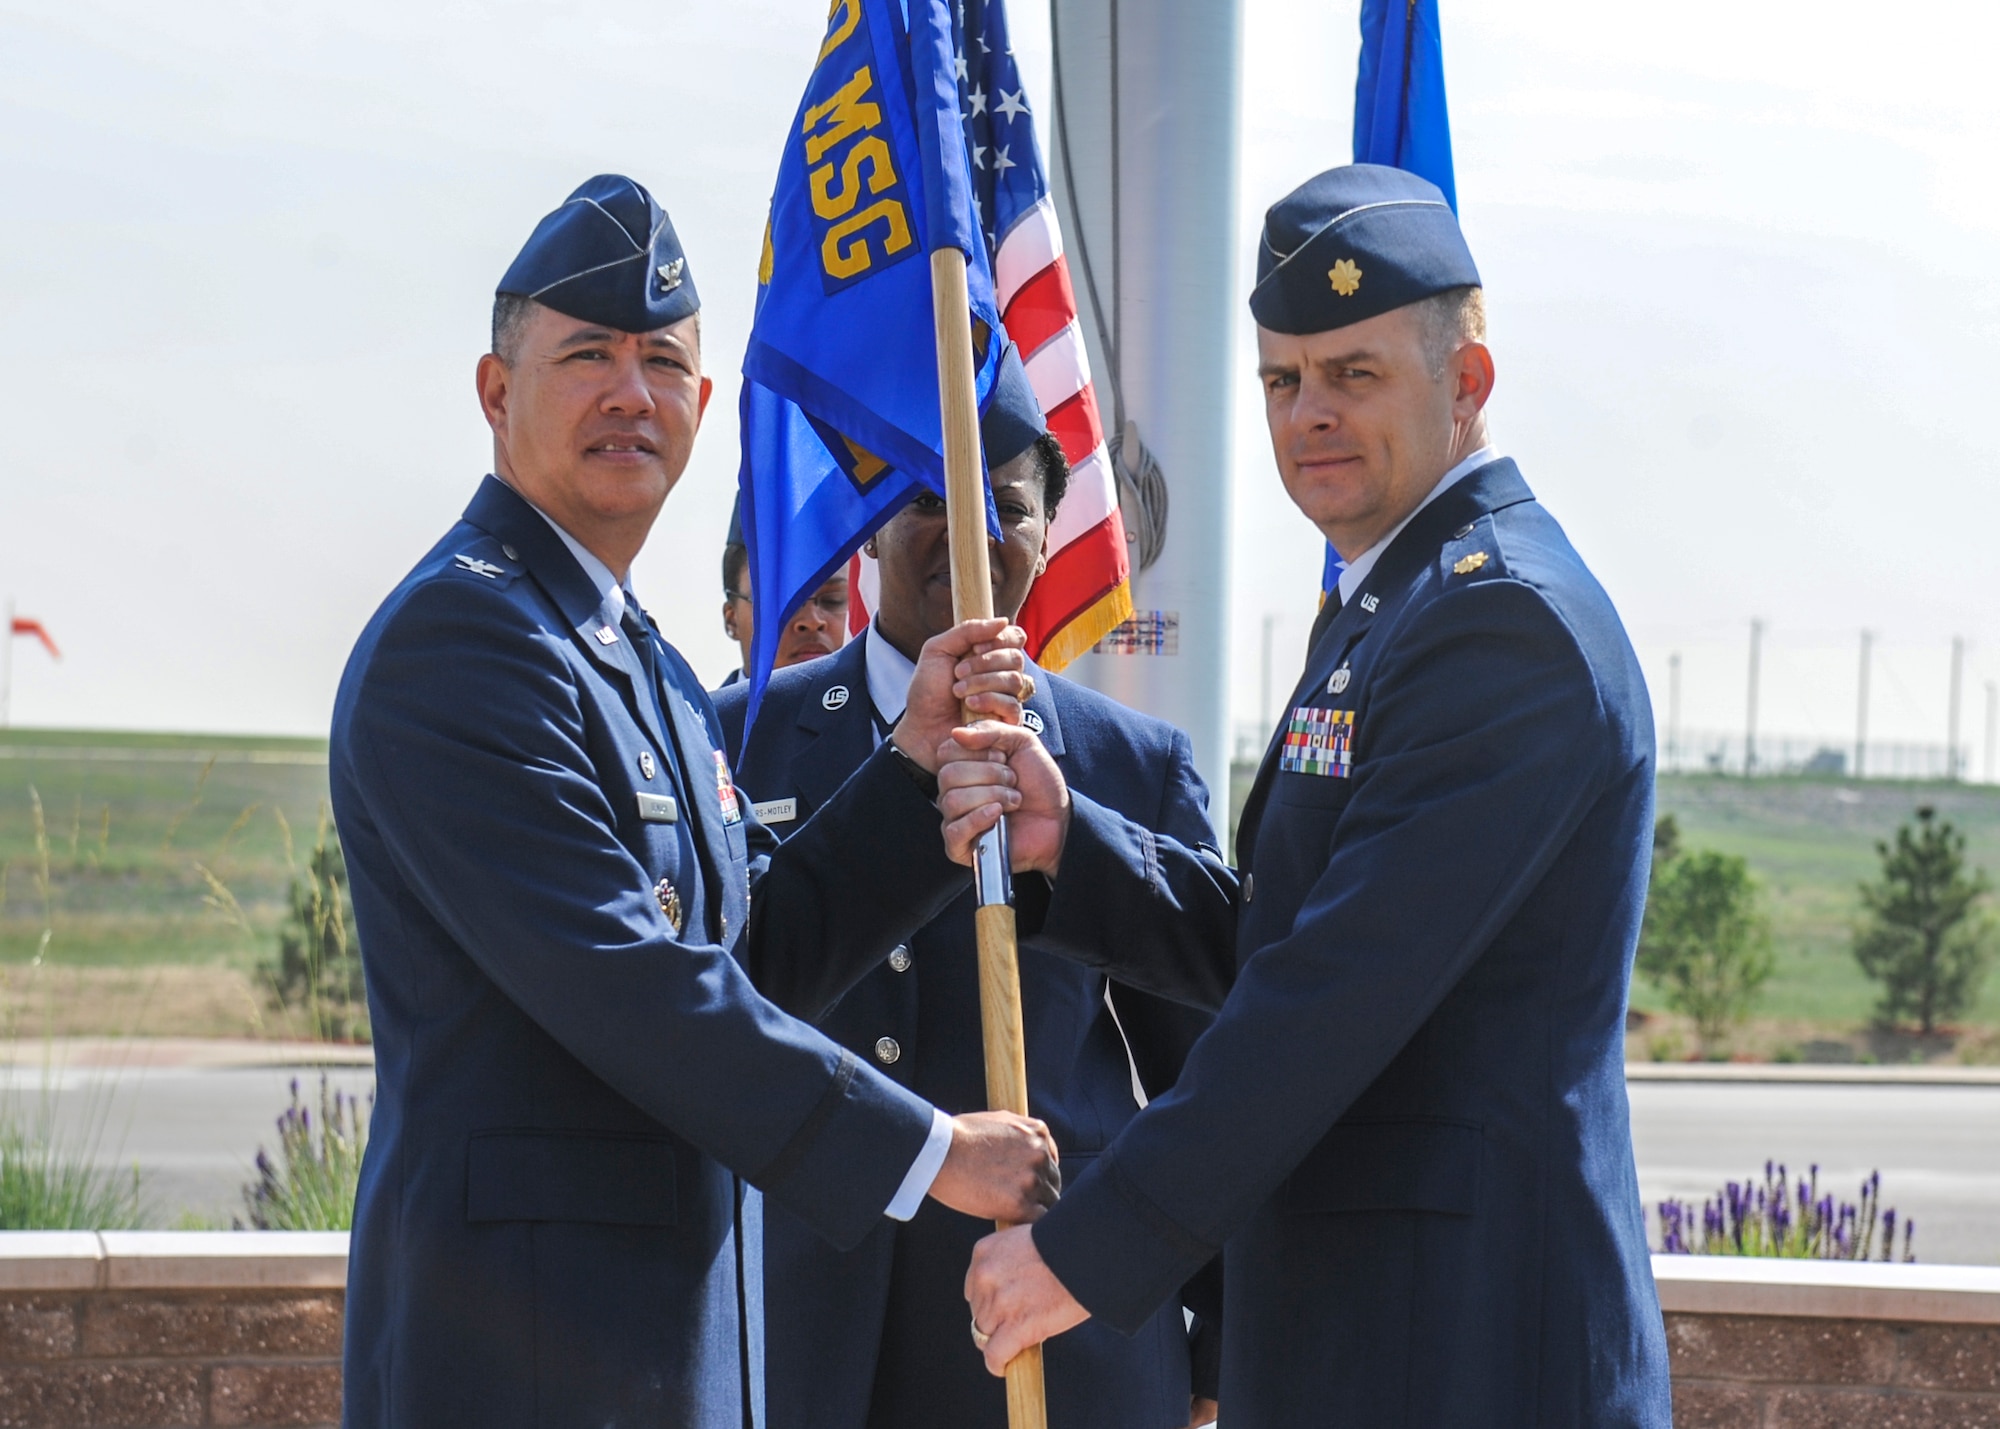 Col. Robert Uemura, left, 460th Mission Support Group commander, hands the guidon to the new 460th Logistics Readiness Squadron commander, Maj. Nicholas Musgrove, at the squadron's change-of-command ceremony June 13, 2013, on Buckley Air Force Base, Colo. The 460th LRS provides logistics support for more than 6,000 active-duty and reserve personnel assigned to Air Force Space Command units and Department of Defense agencies in the Front Range. The unit also sustains combat logistics support by providing overall direction and management of base processes related to vehicles, cargo movement, equipment, deployment planning and bulk fuels. (U.S. Air Force photo by Staff Sgt. Christopher Gross/Released)